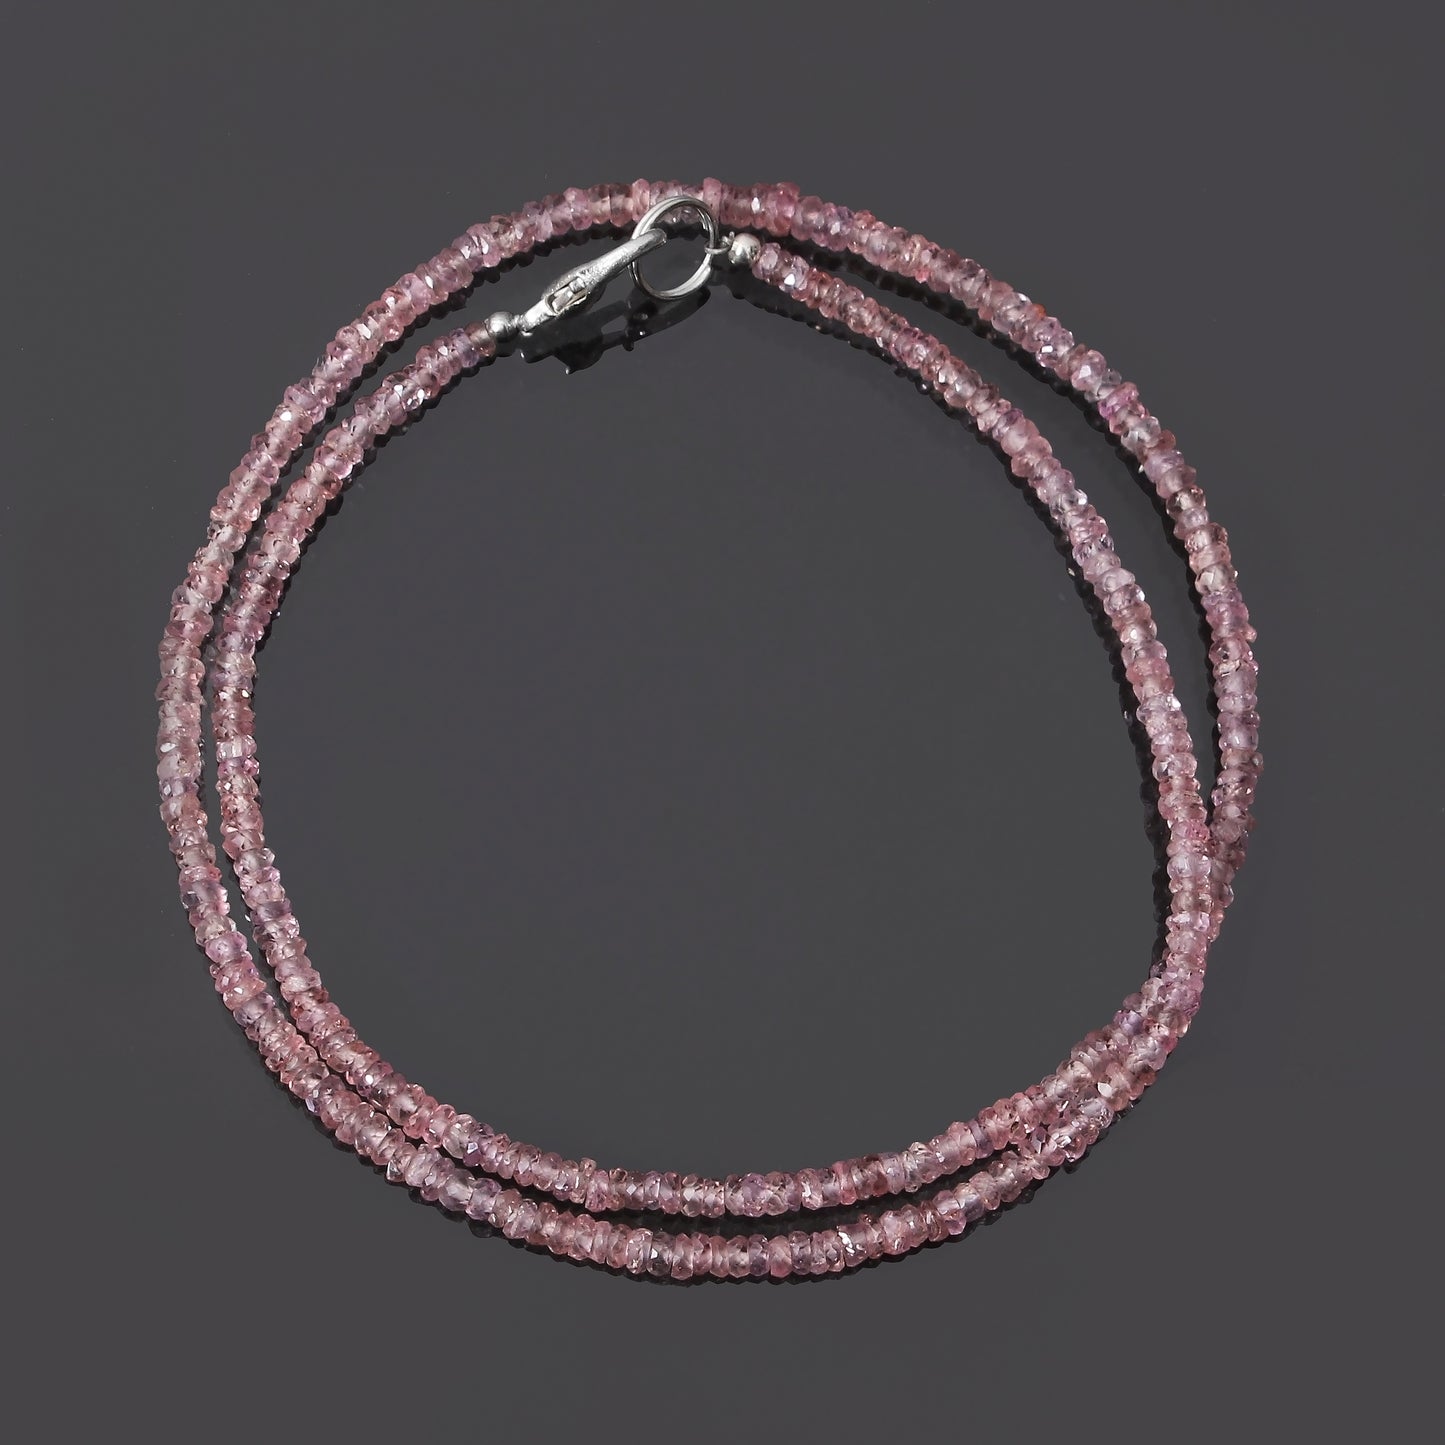 Natural AAA Grade Quality Pink Sapphire Necklace - Handcrafted with 2.5-4mm Sapphire Beads